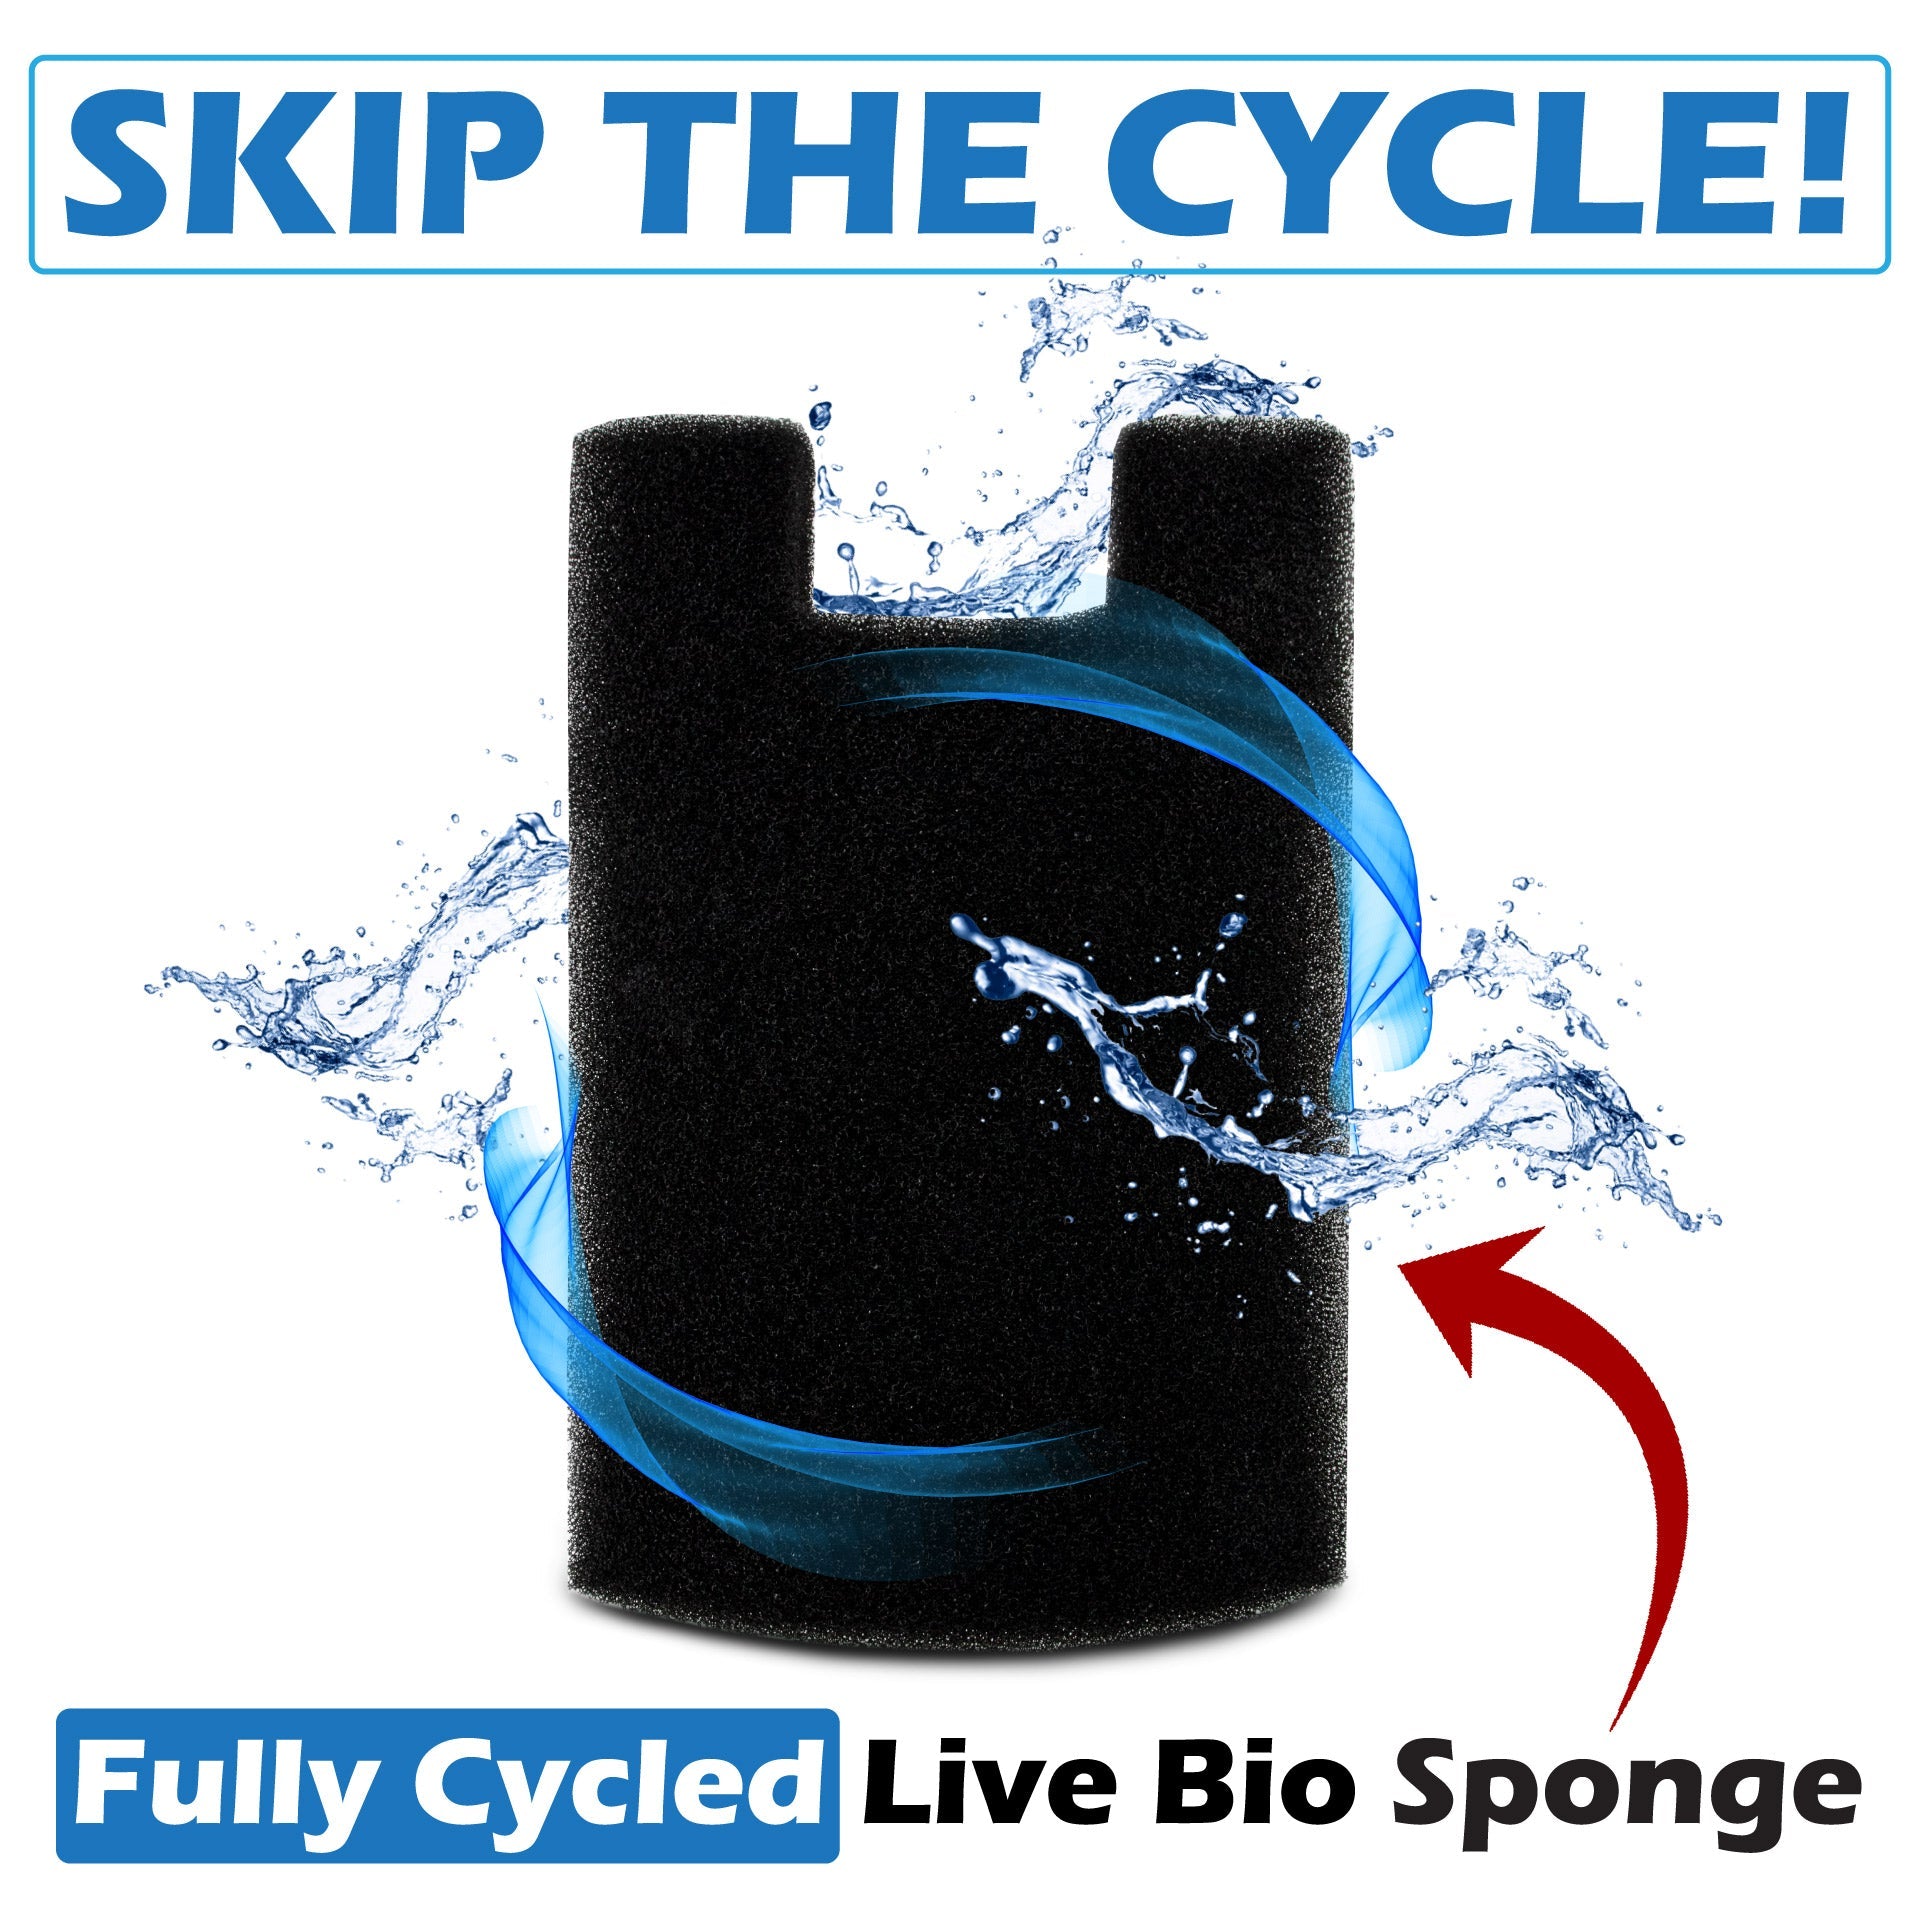 *NEW* Instant - Skip the Cycle kit! (Jelly Cylinder Nano) - Build Your Own Kit